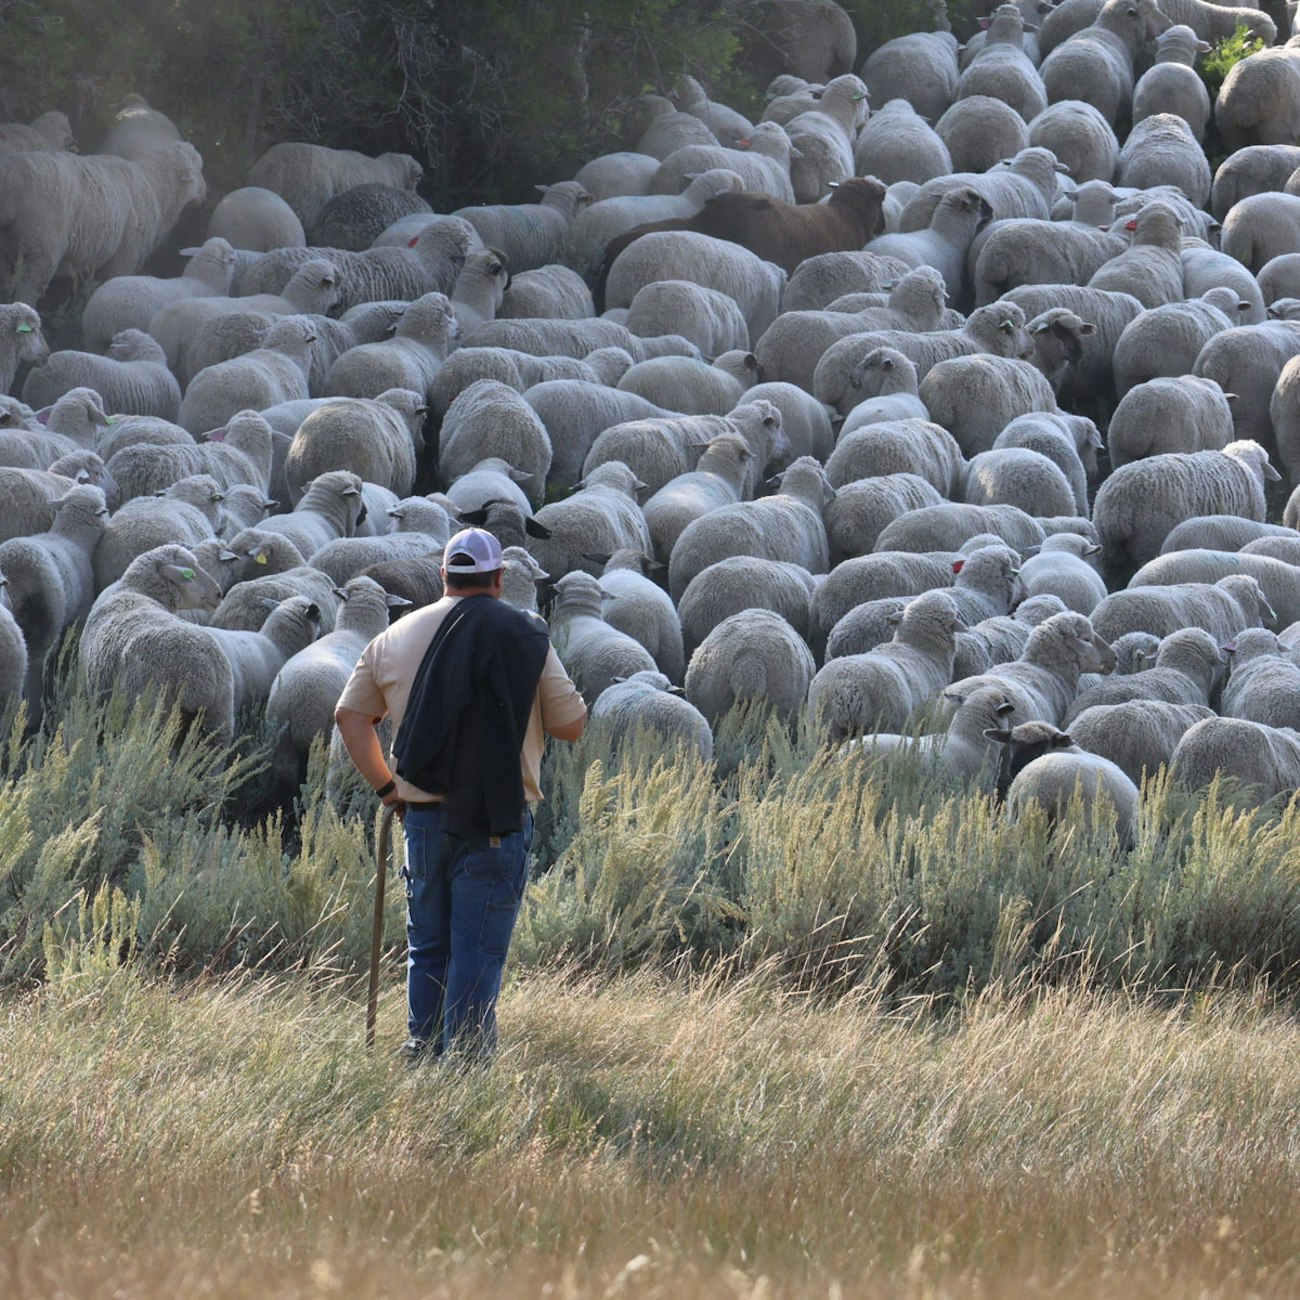 Man in baseball cap, back to camera, with a flock of sheep moving uphill